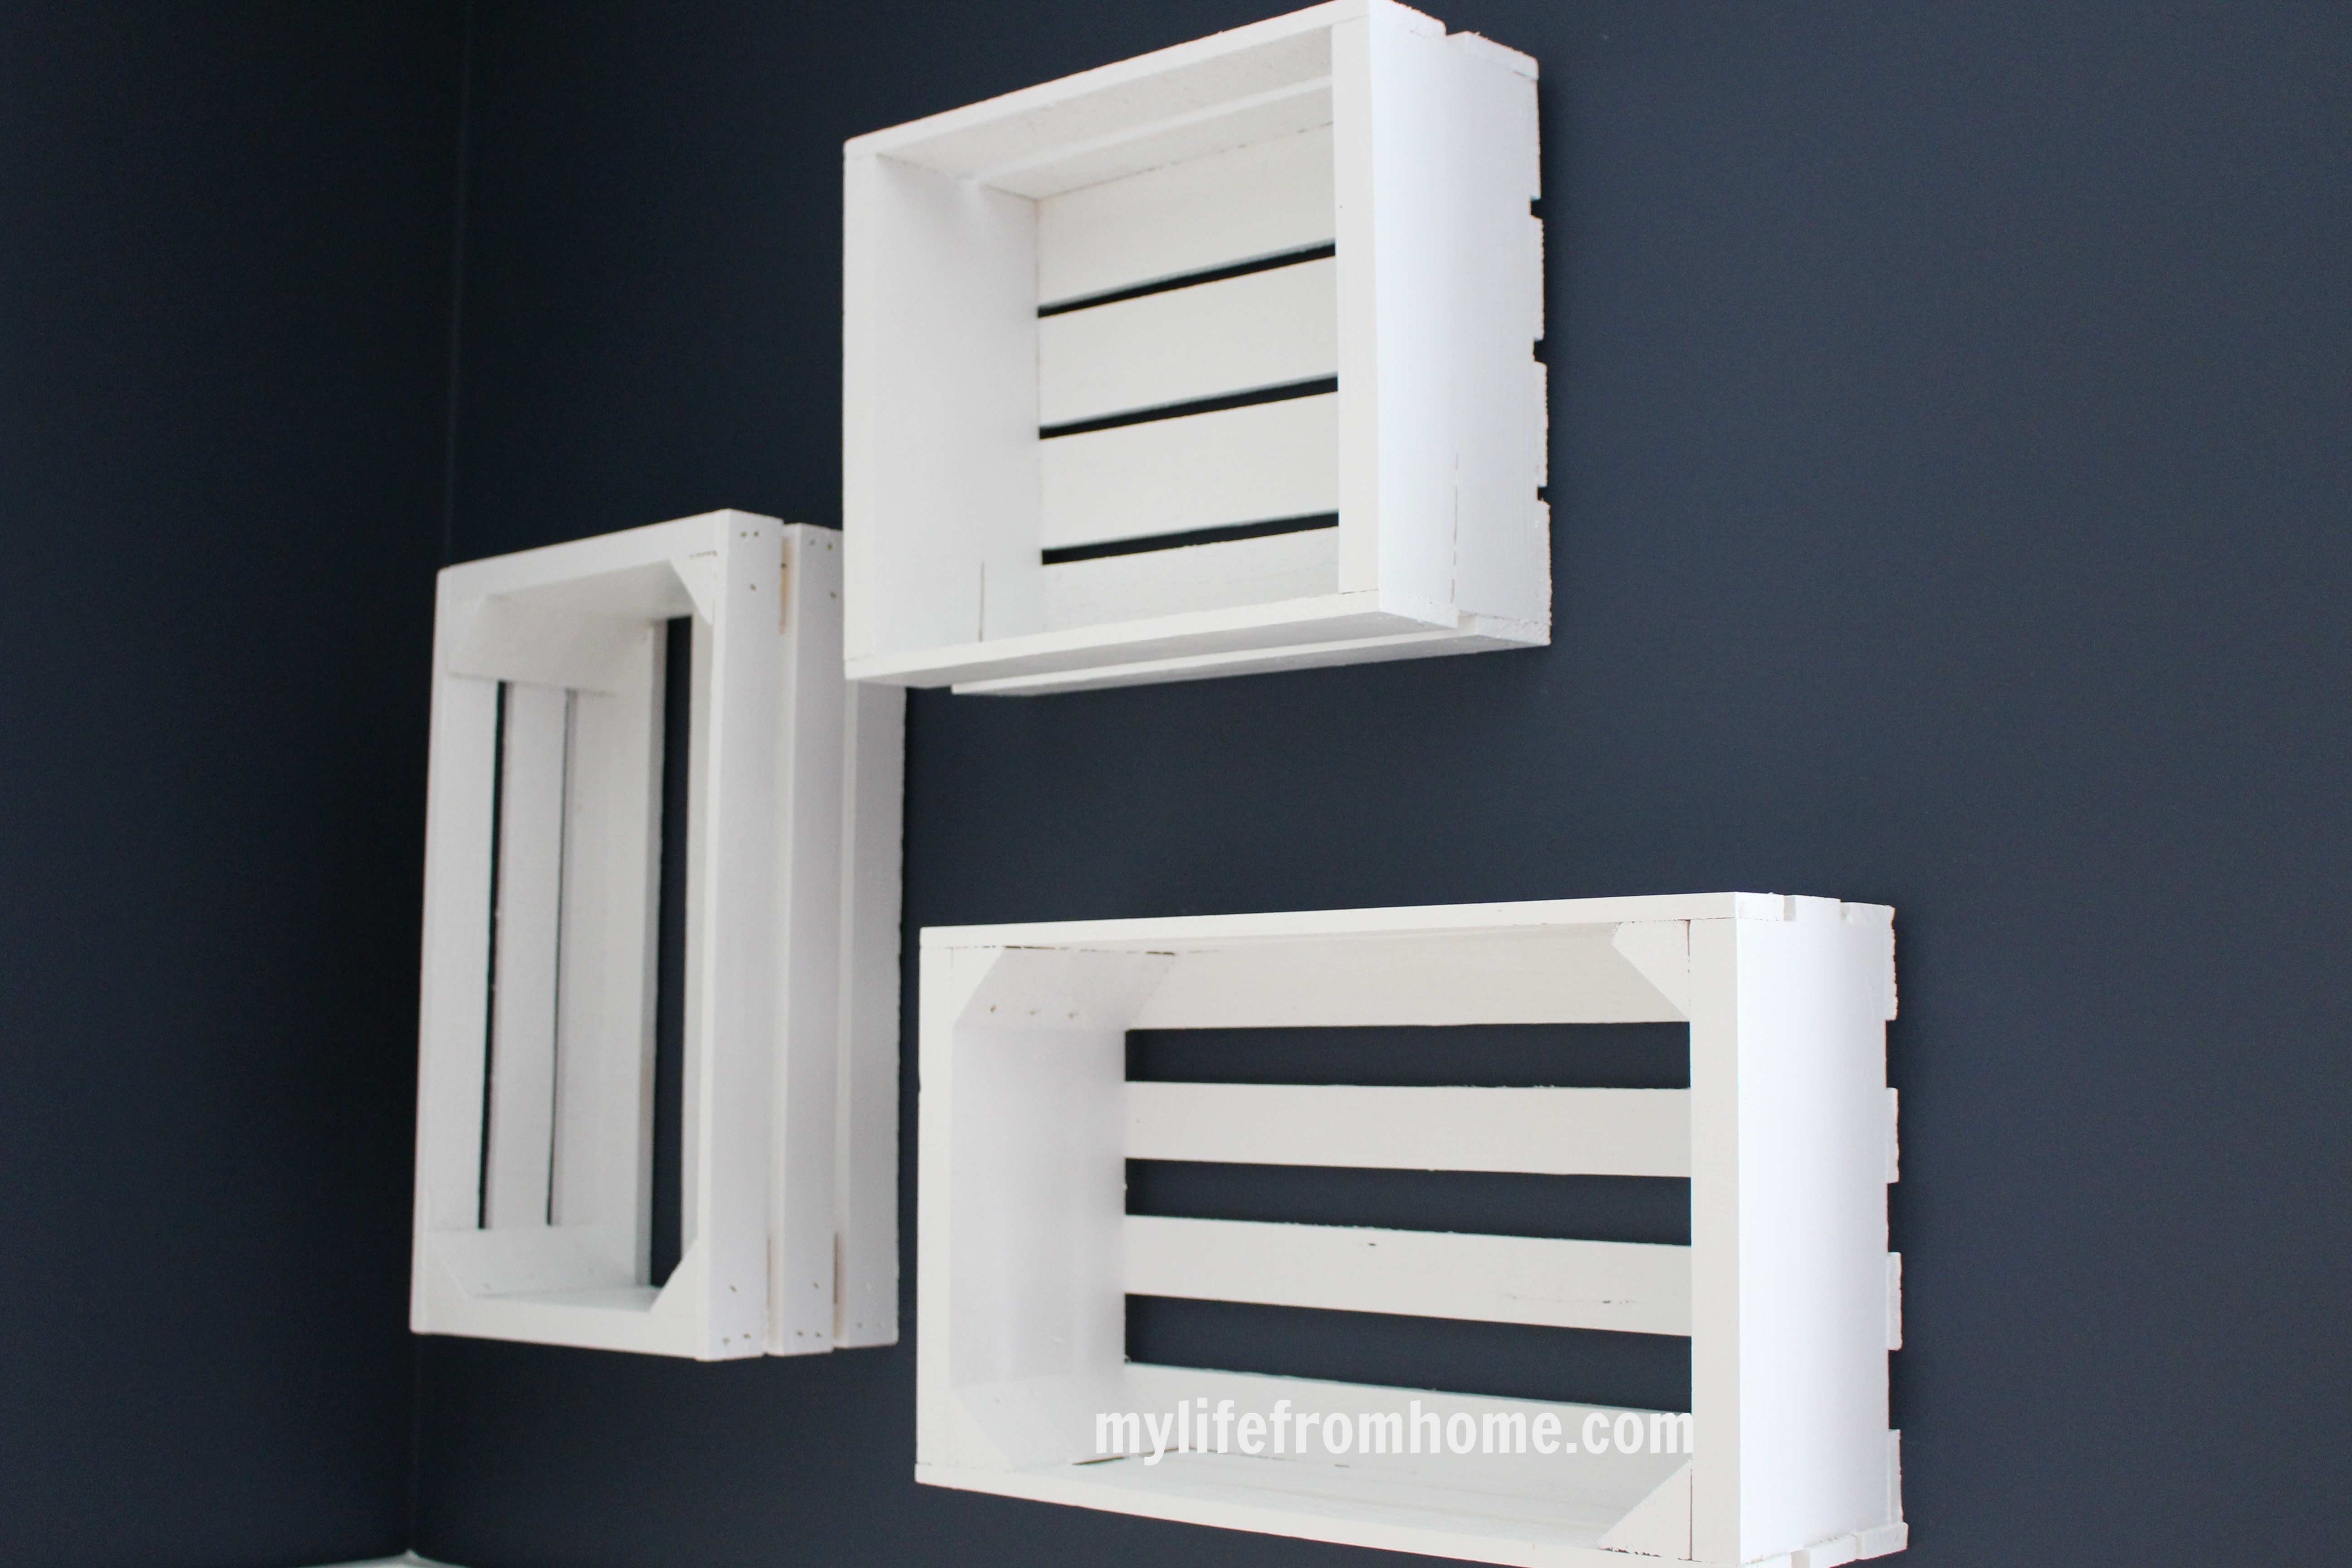 Hanging wall crates for displaying kids art projects by www.whitecottagehomeandliving.com